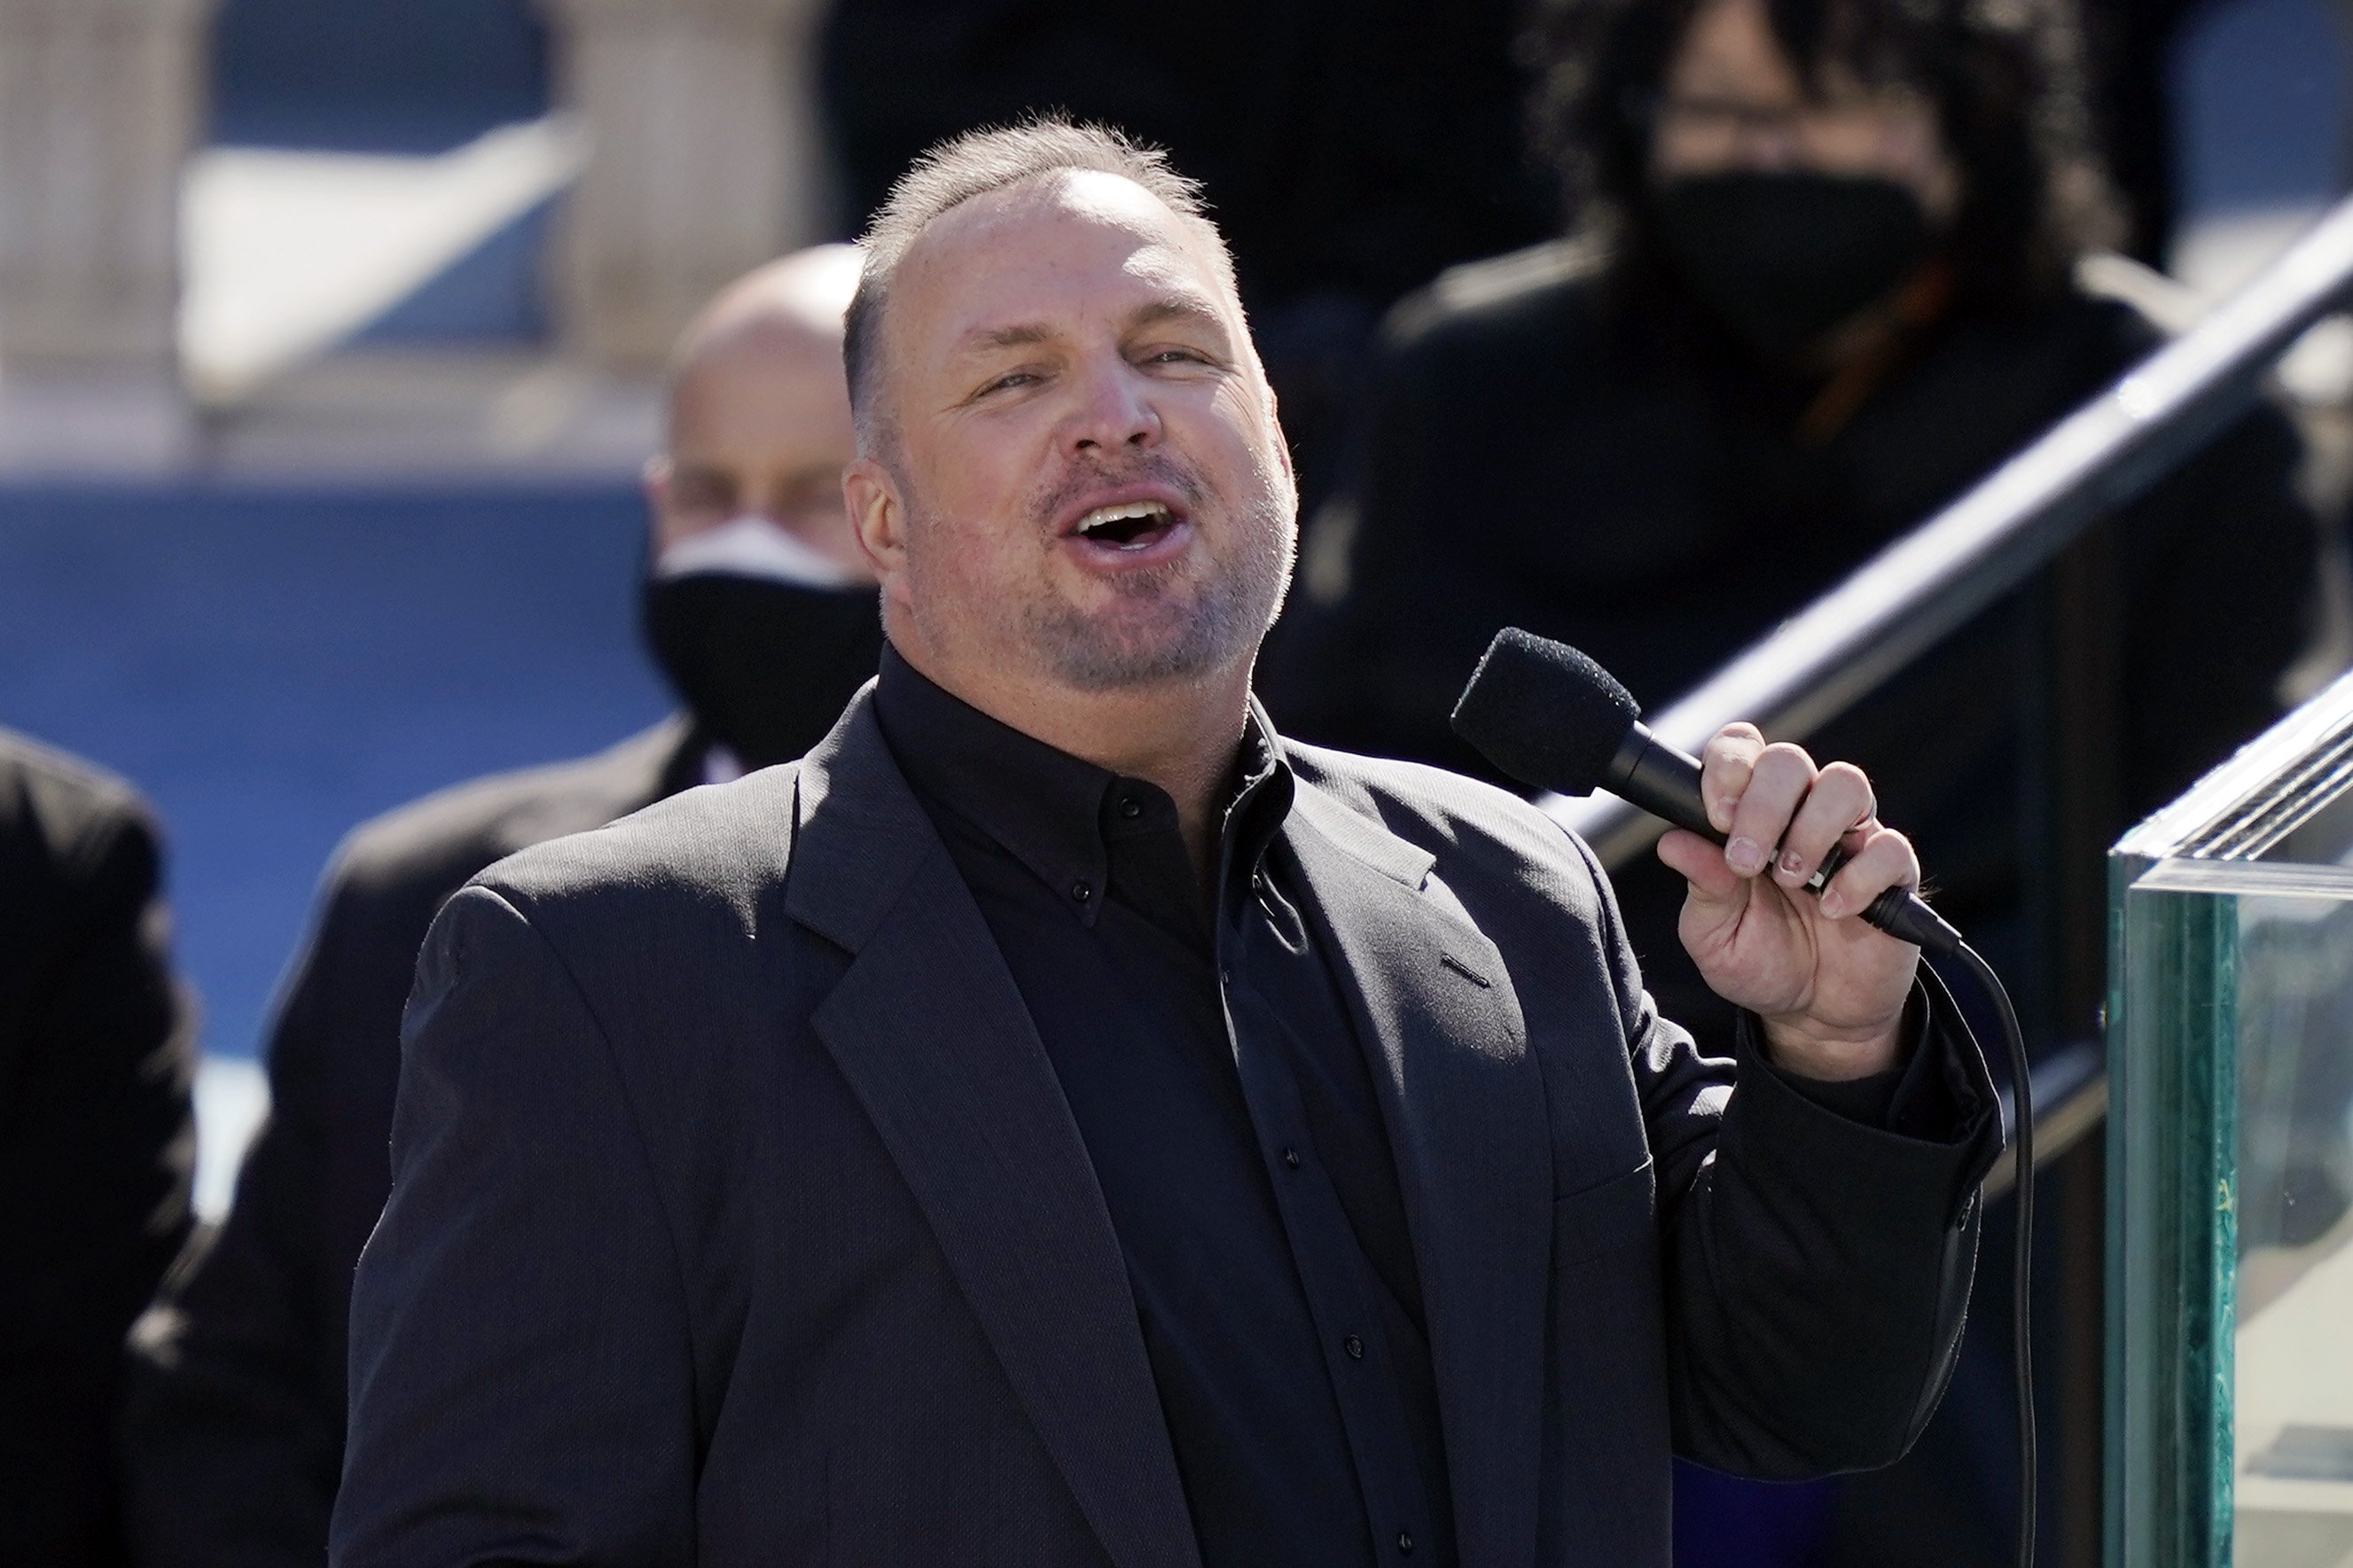 Garth Brooks performs at the inauguration of U.S. President Joe Biden on the West Front of the U.S. Capitol on January 20, 2021 in Washington, DC. During today's inauguration ceremony Joe Biden becomes the 46th president of the United States. | Source: Getty Images